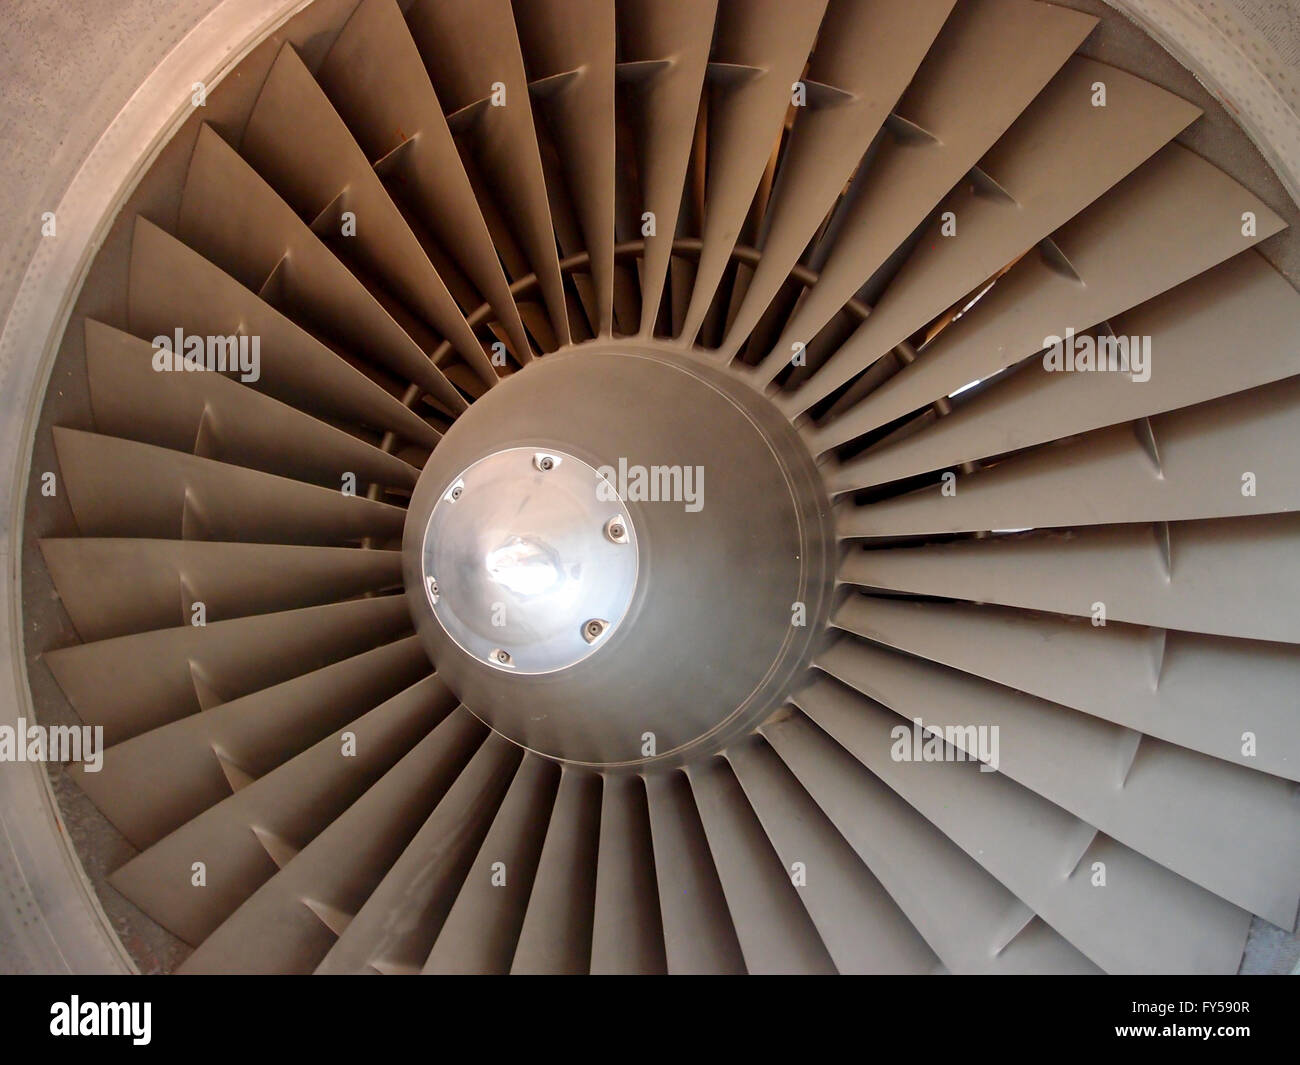 The turbine and blades of a jet engine. Stock Photo